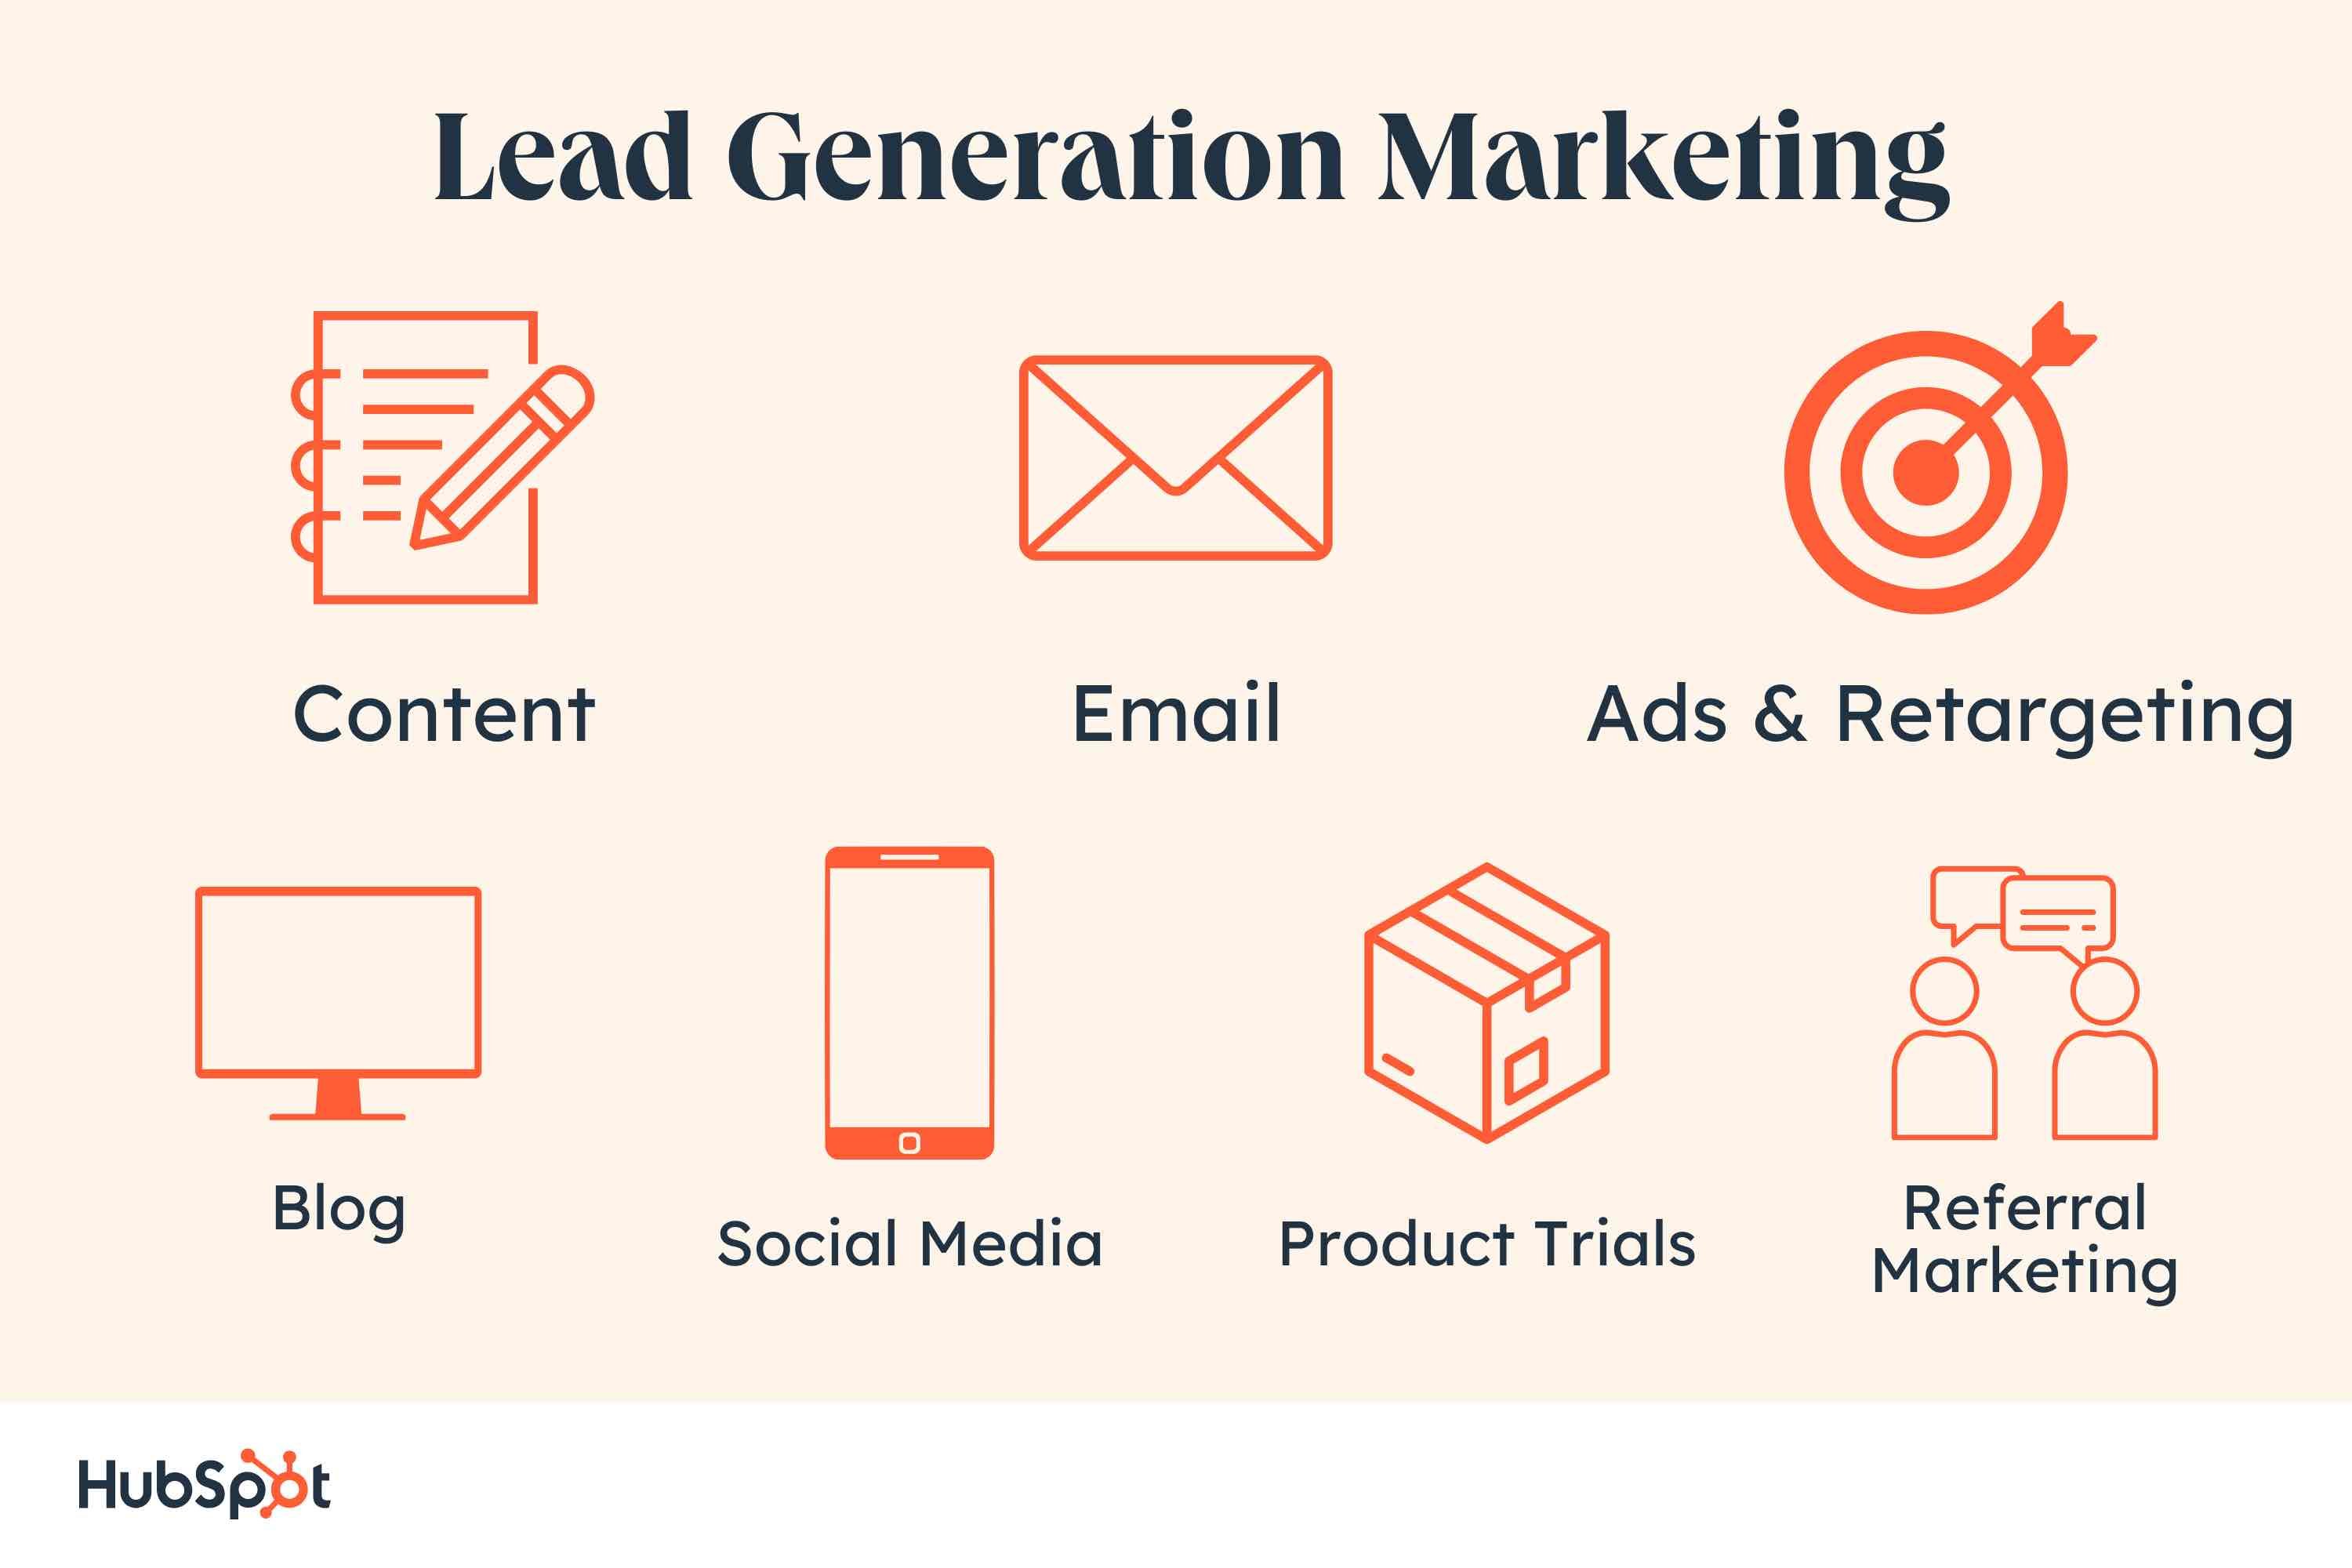 lead generation marketing: content, email, ads, blogs, social media, product trials, referral marketing